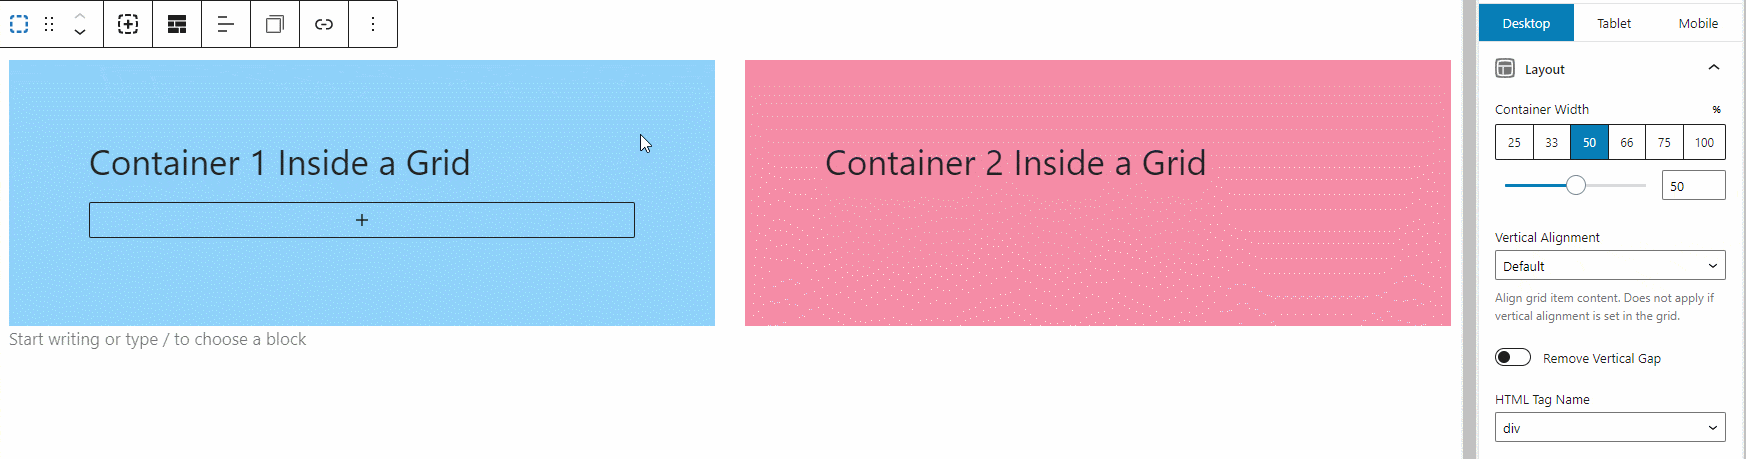 10 gb container width grid